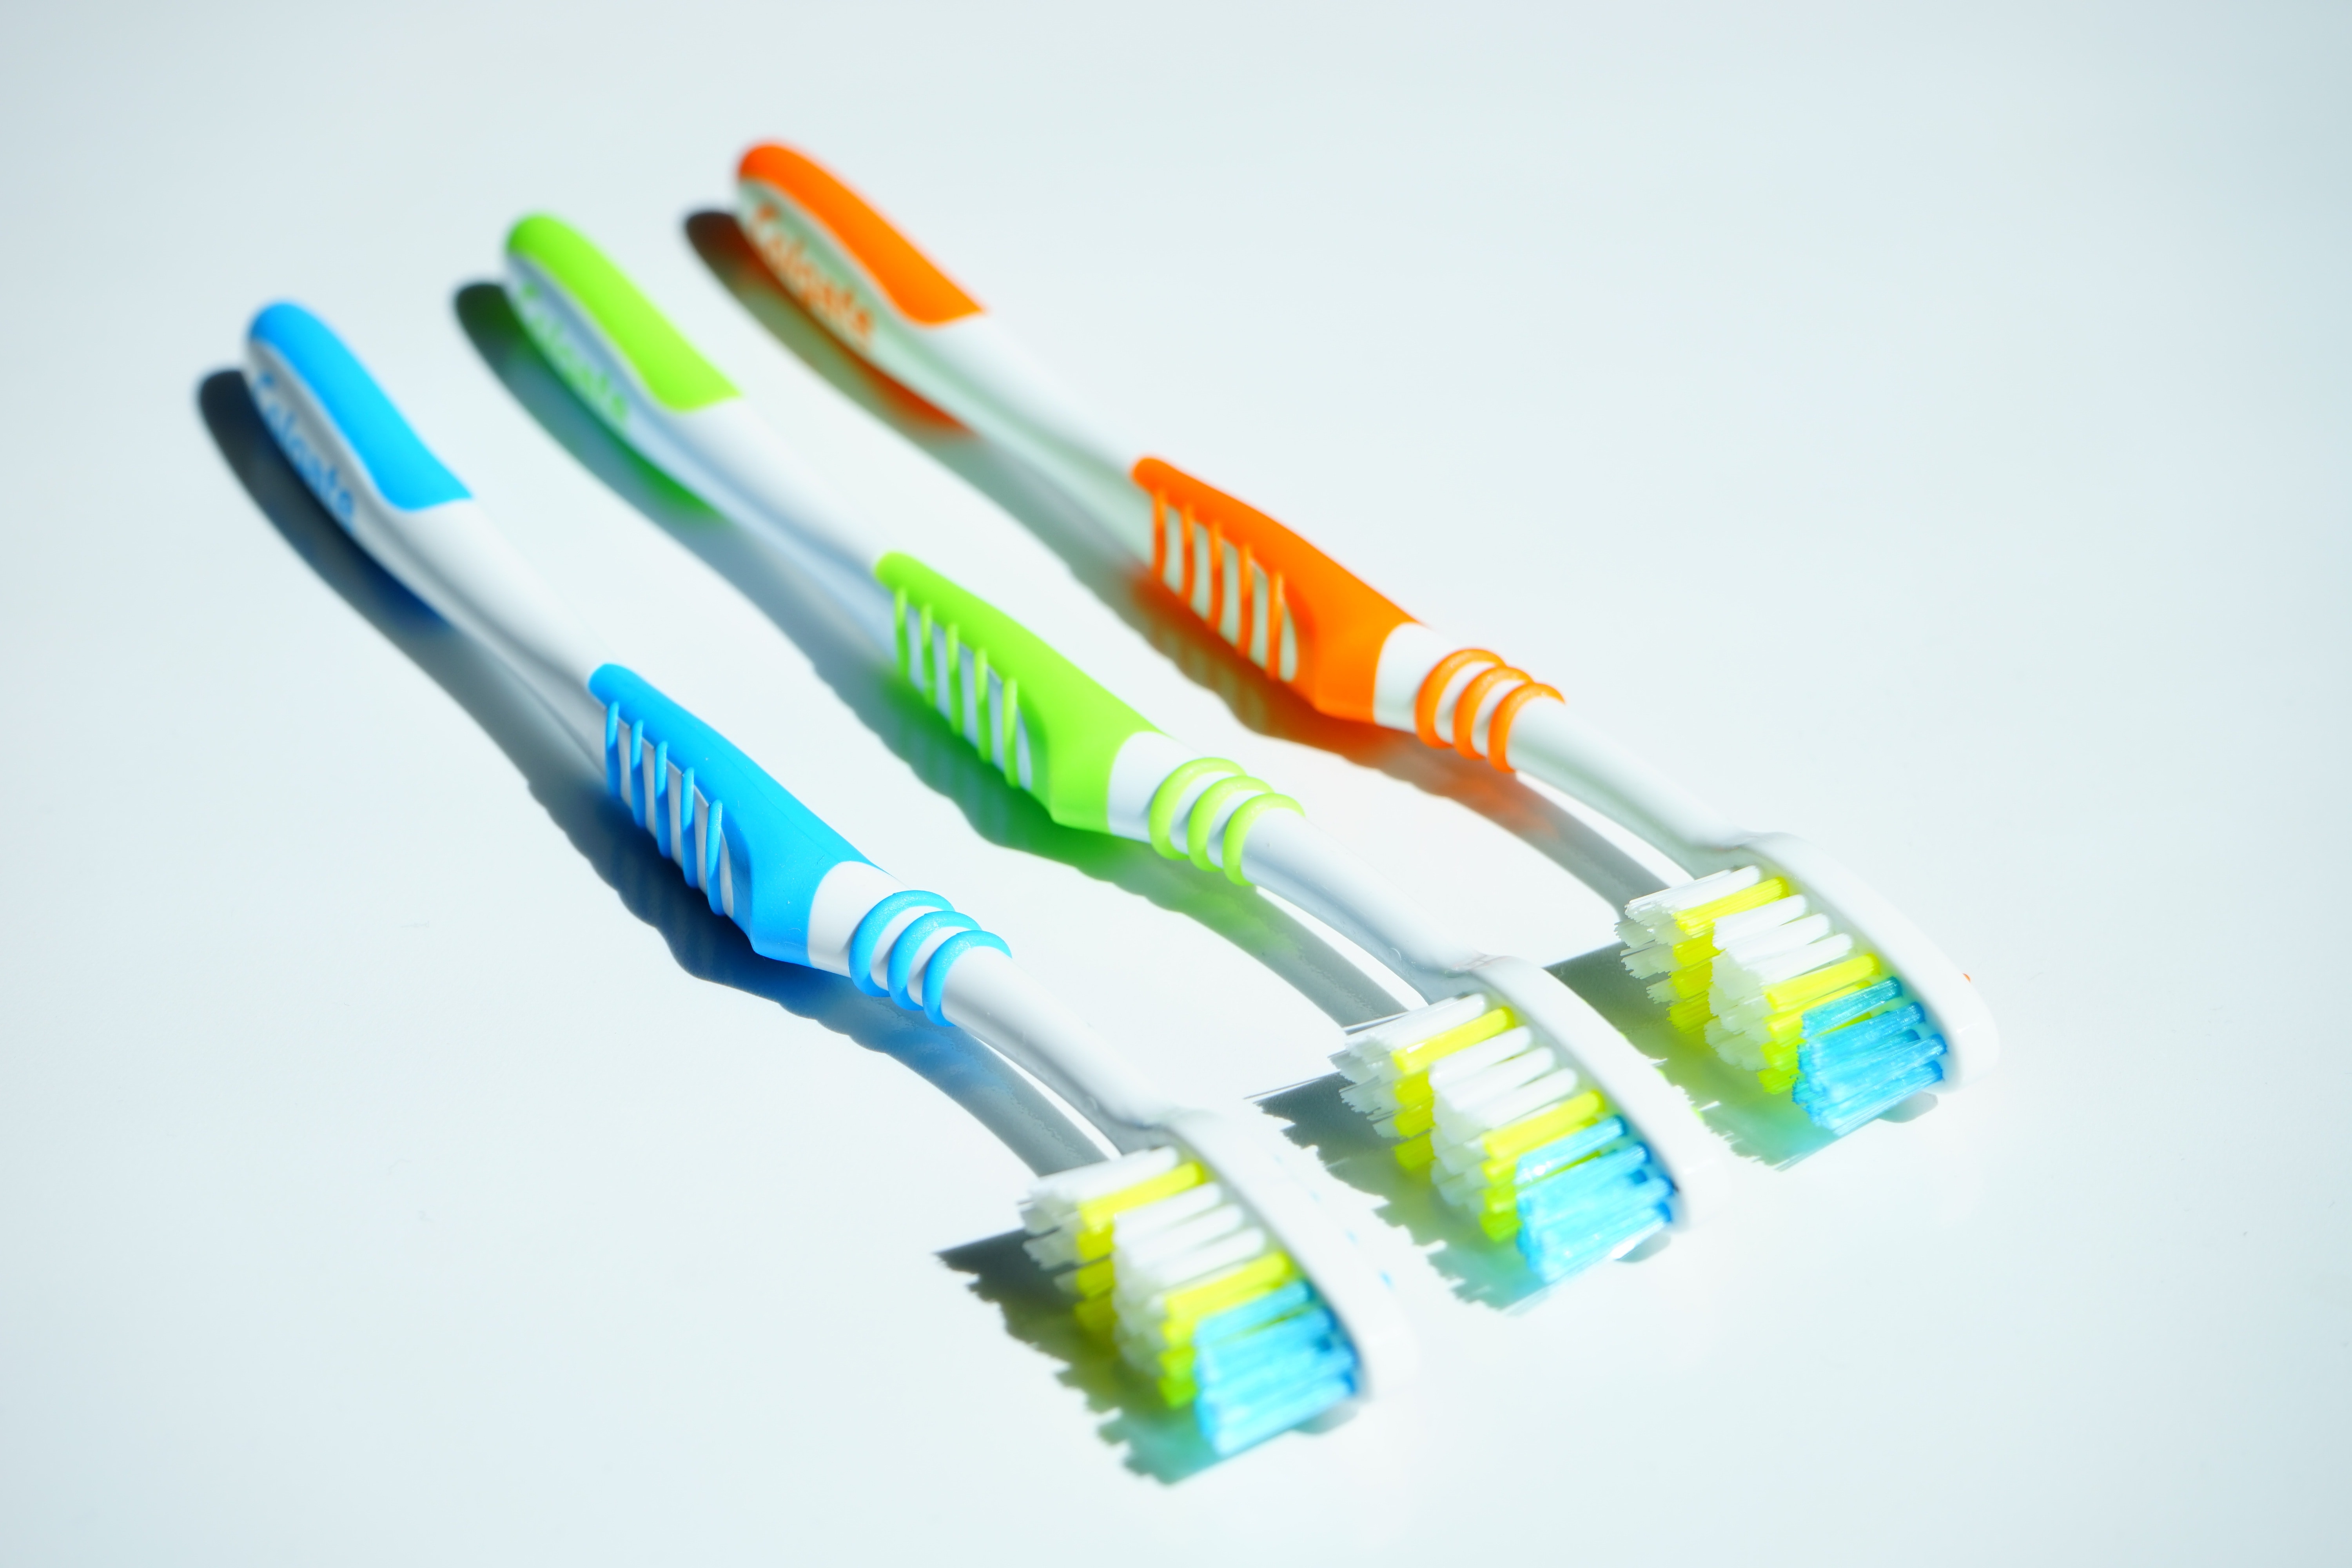 yellow, orange, and blue toothbrushes